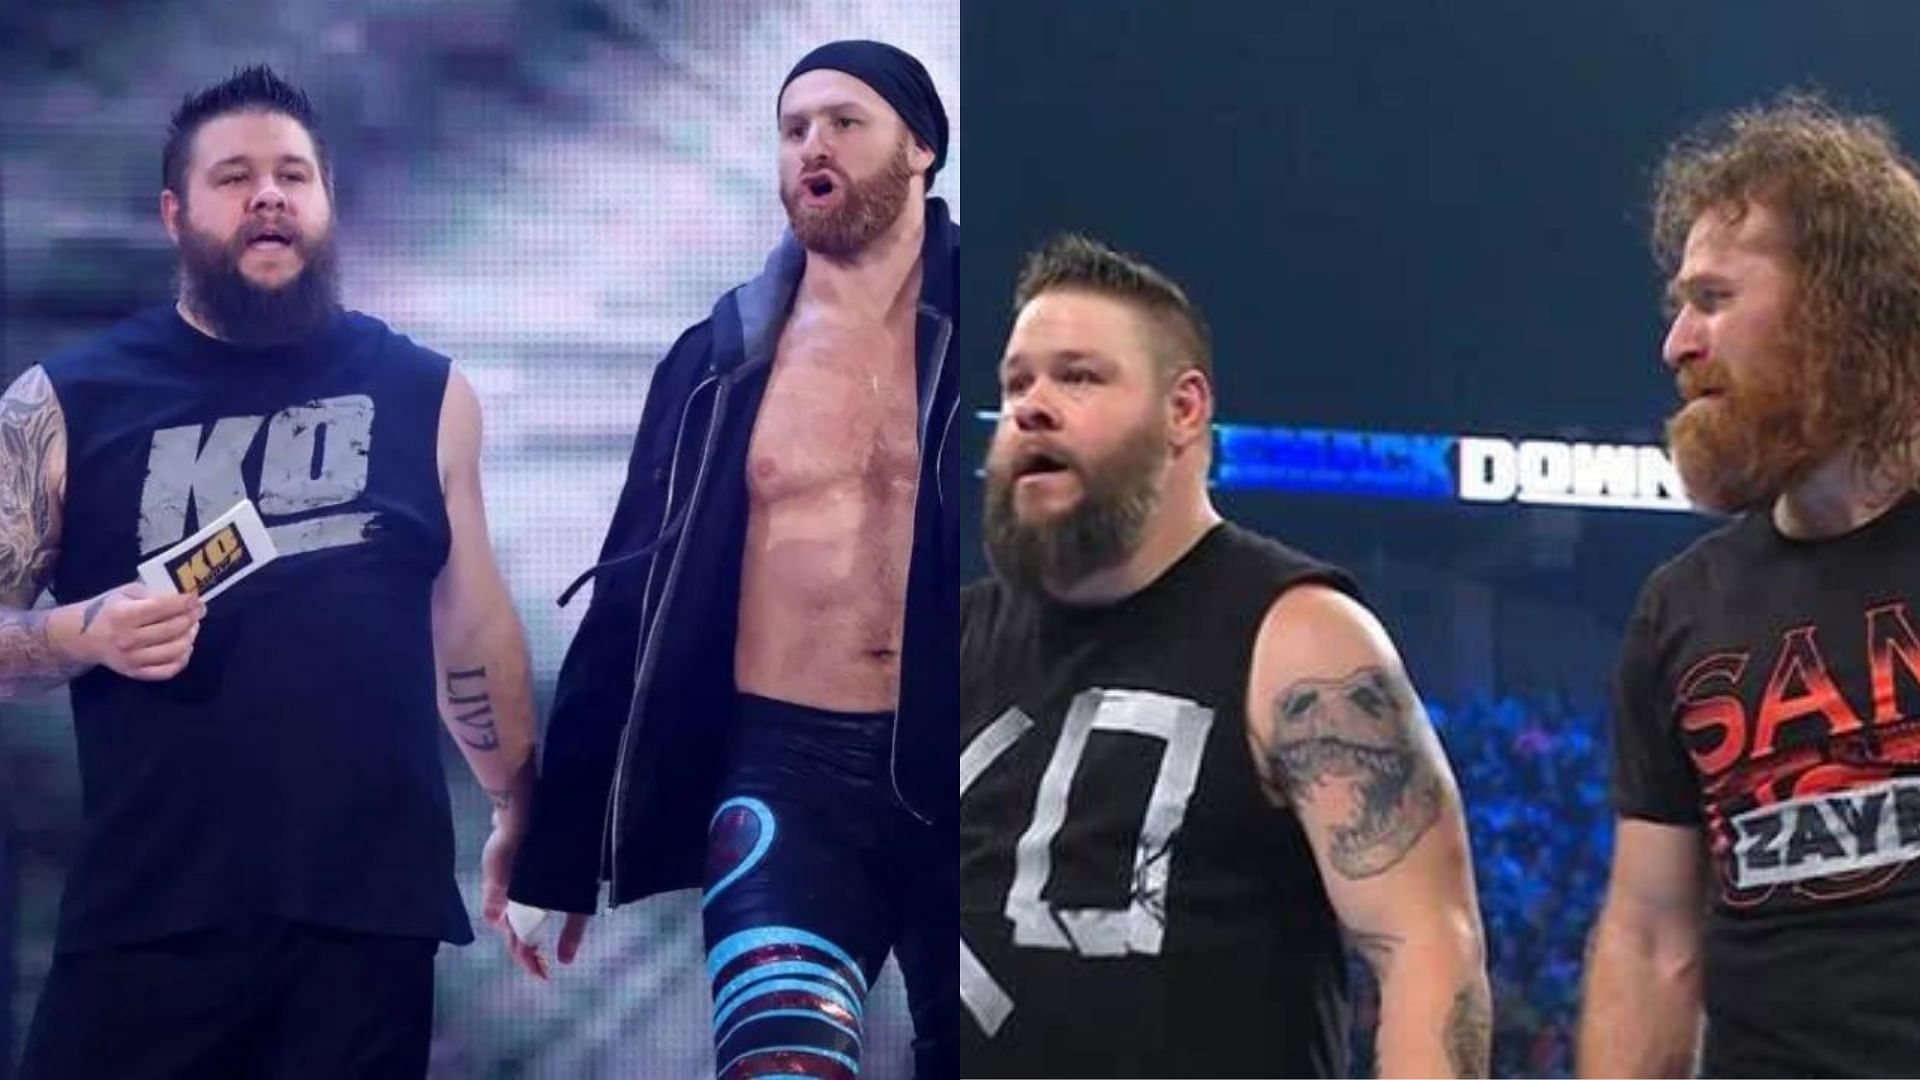 Sami Zayn and Kevin Owens will challenge The Usos at WrestleMania